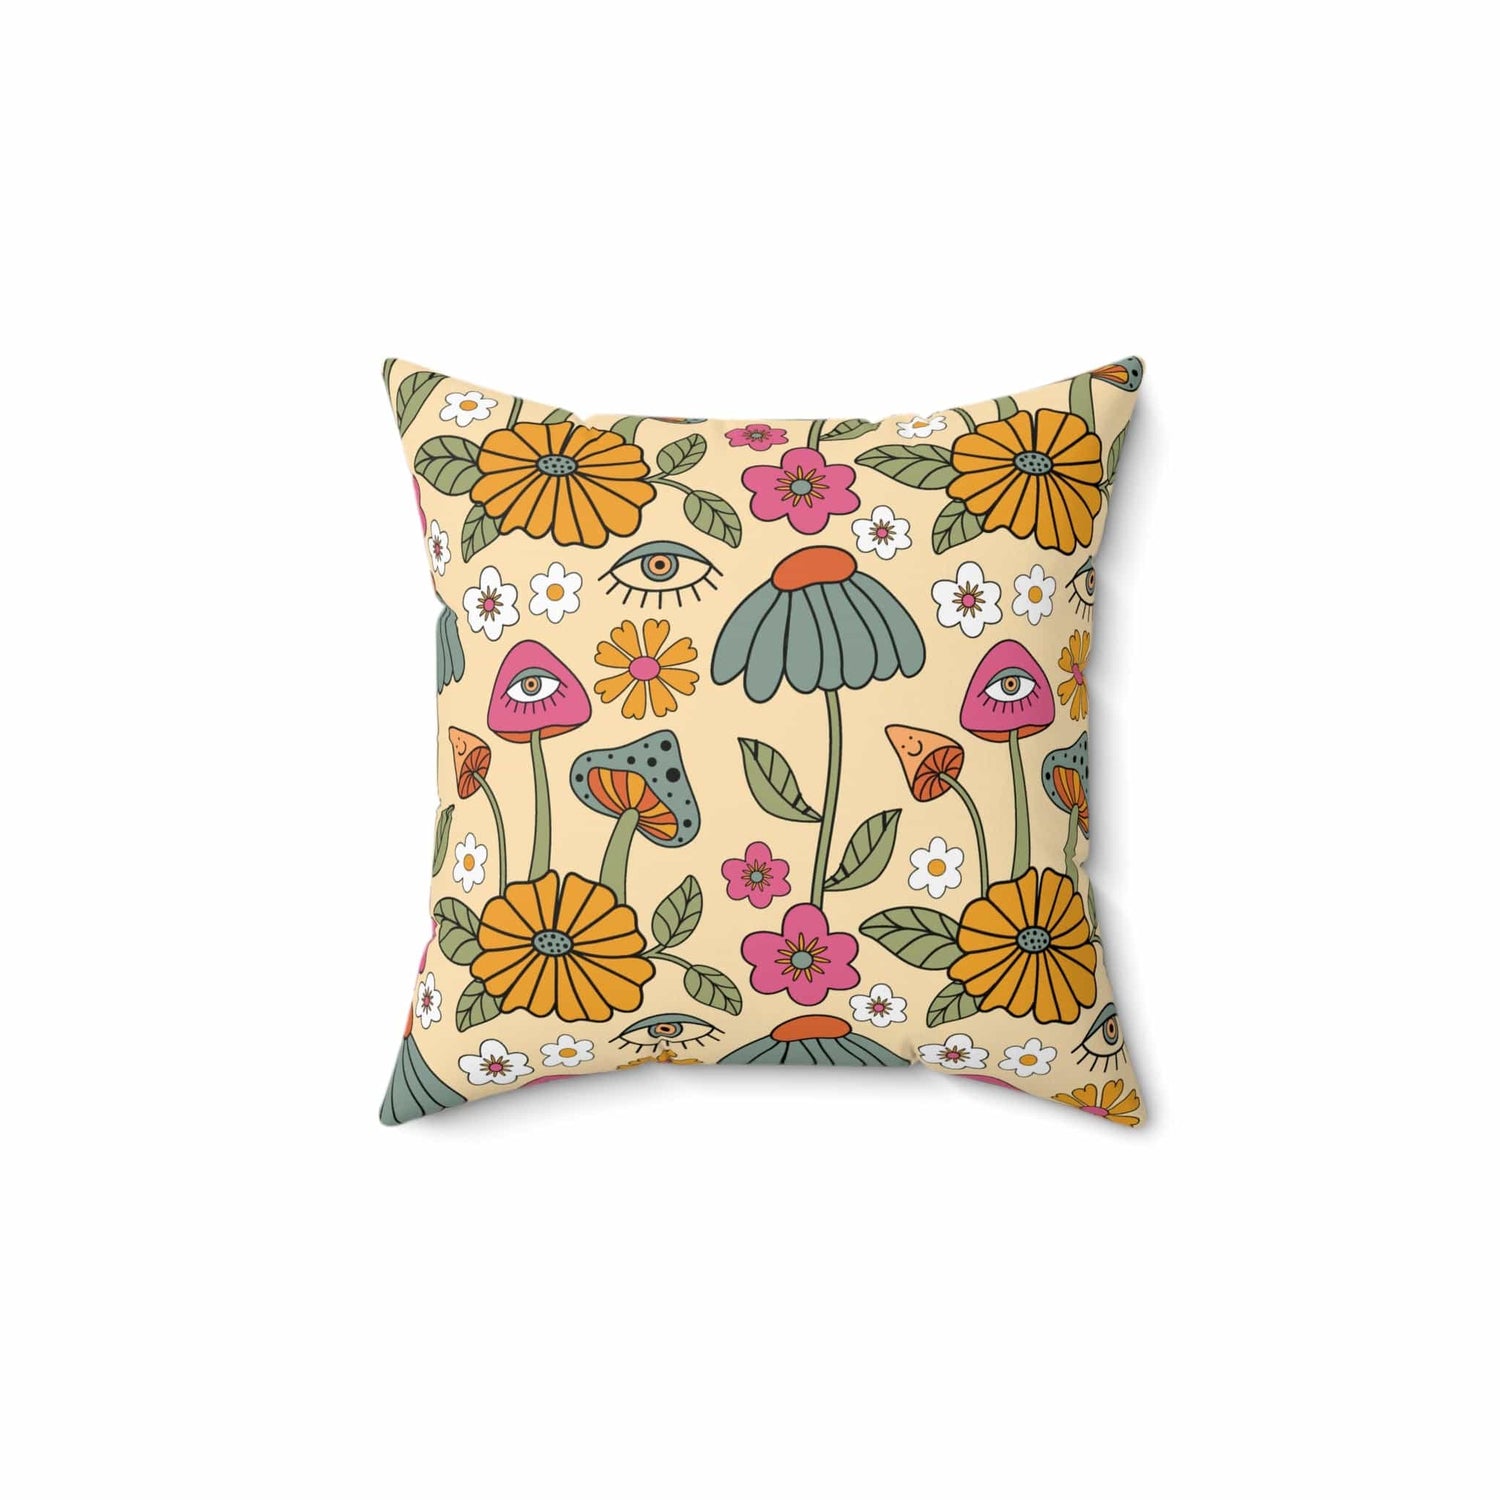 Kate McEnroe New York Hippie Mushroom Cottagecore Aesthetic Throw Pillow with Insert, Retro Floral 70s Psychedelic Accent Pillow Throw Pillows 14&quot; × 14&quot; 21748313160857796059